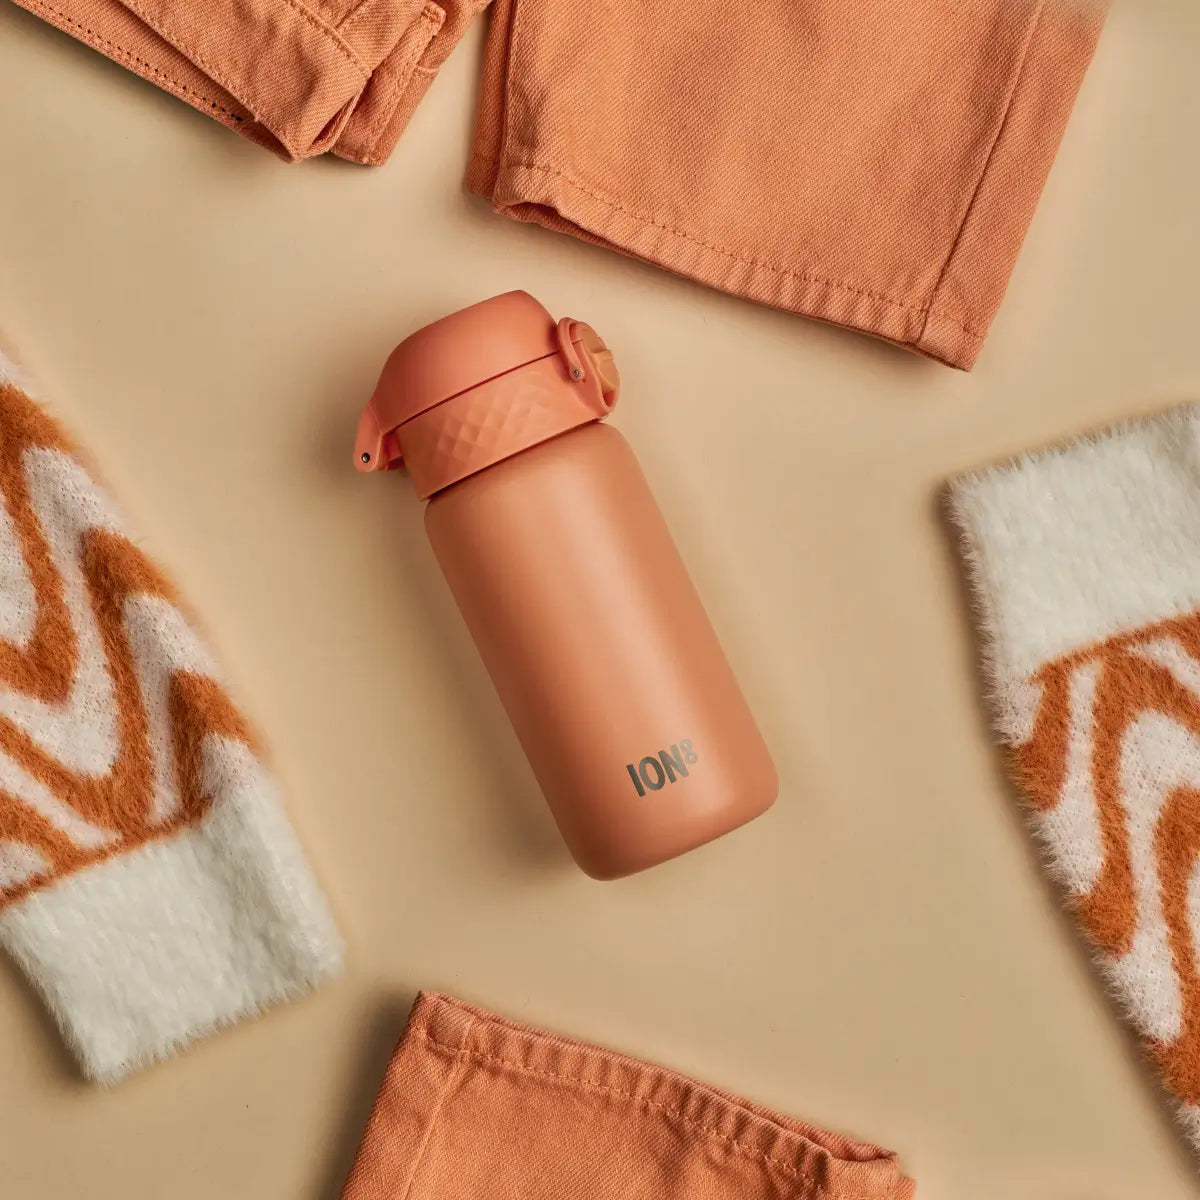 coral coloured steel water bottle in a small size flat lay with similar coloured accessories and clothes